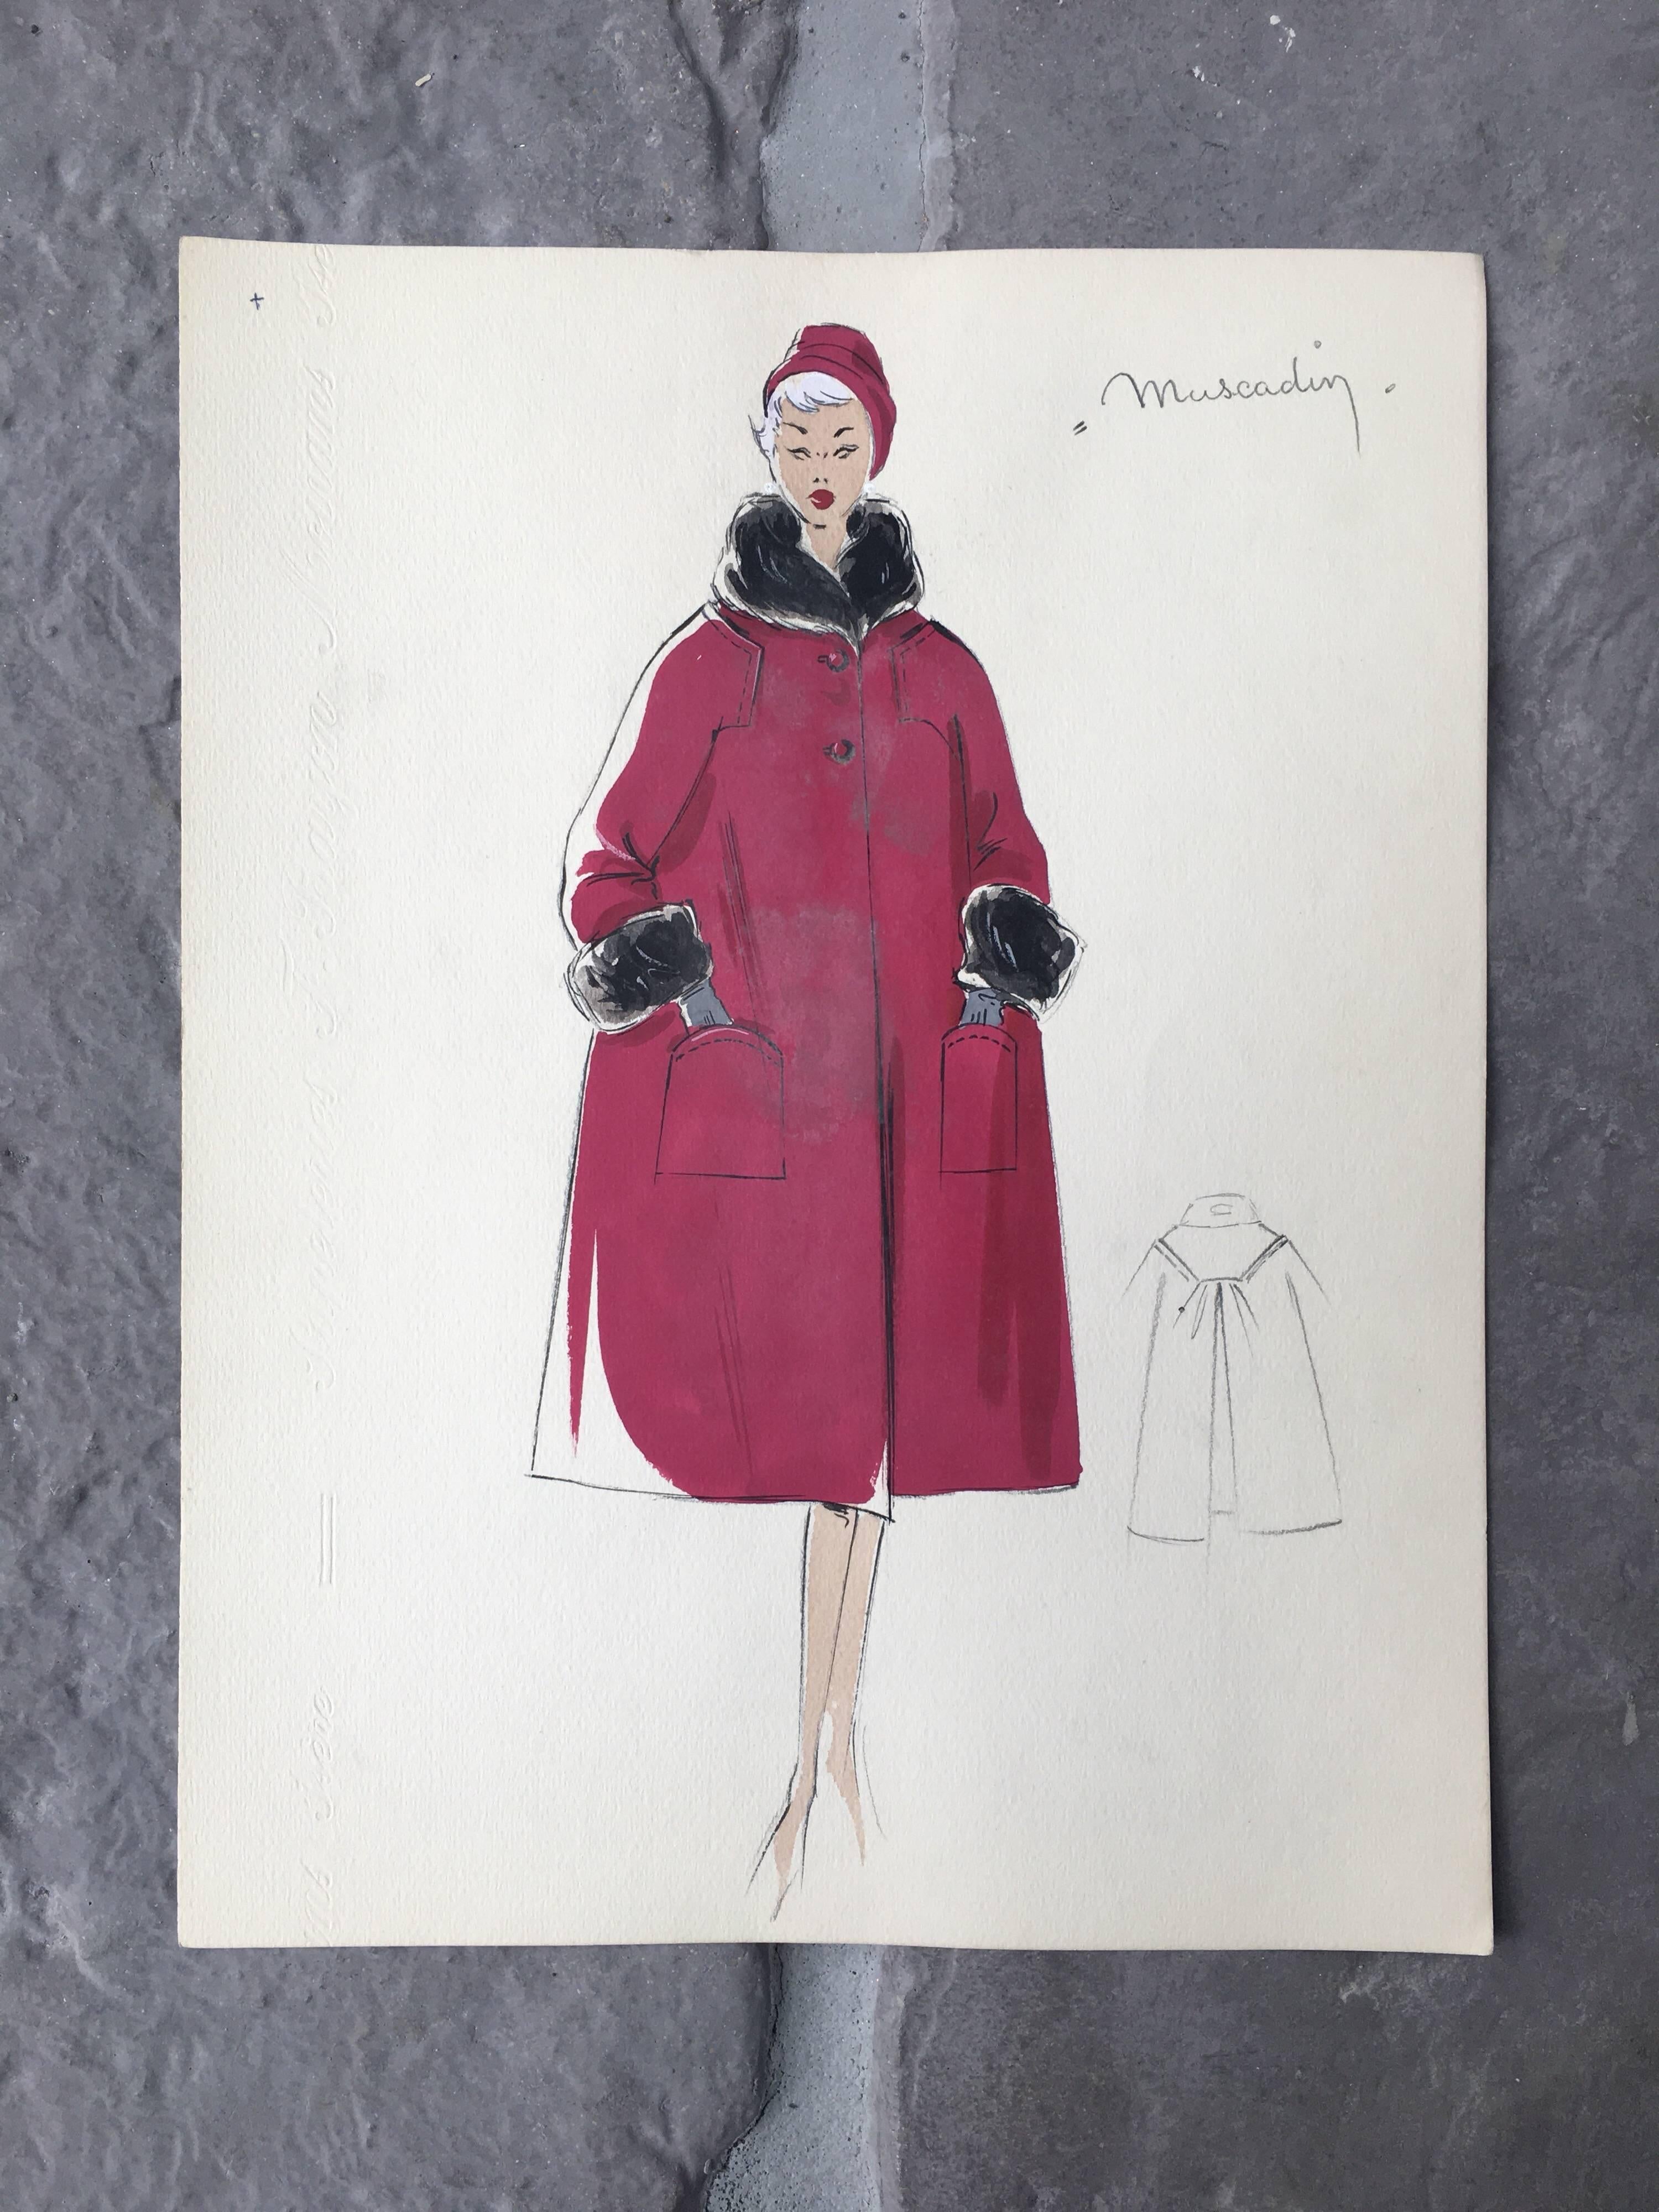 Lady in Elegant 1950's Red Coat Parisian Fashion Illustration Sketch - Art by Unknown